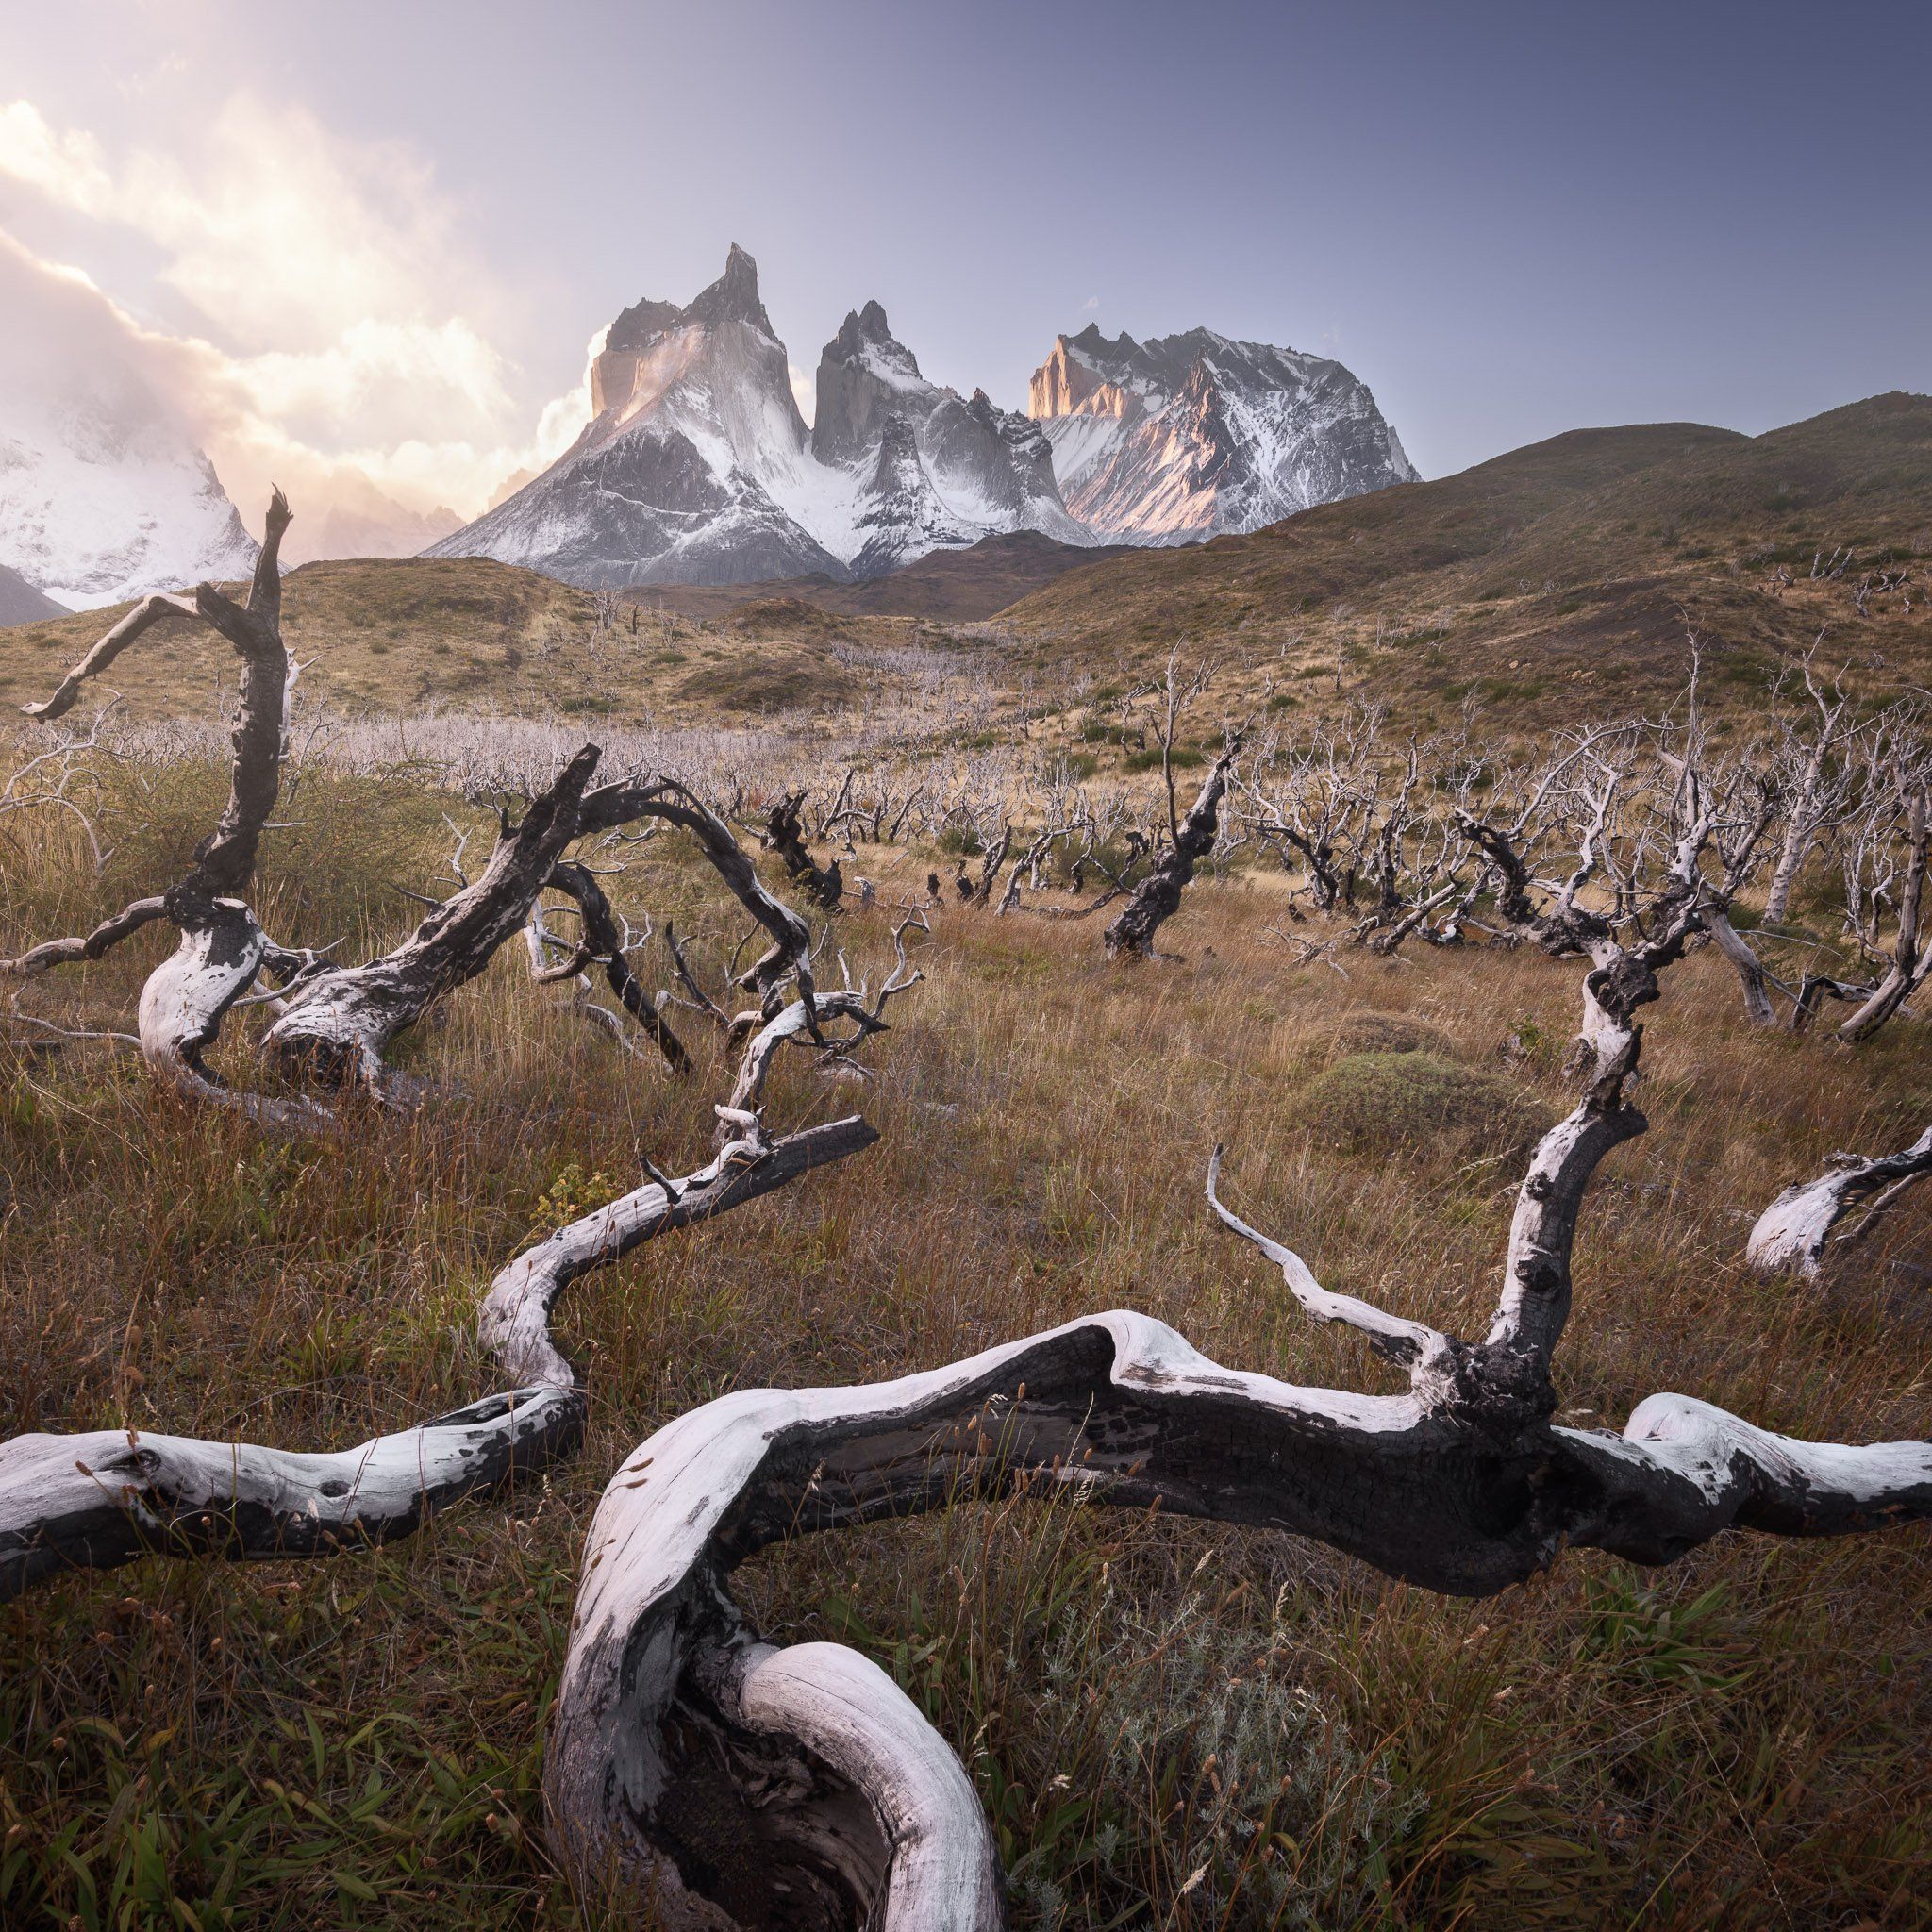 america, andes, beautiful, black, blue, branch, chile, clouds, cuernos, curved, dark, dead, del, dry, forest, glacier, grass, hiking, hill, ice, landmark, landscape, light, log, morning, moss, mountain, national, nature, outdoor, paine, park, patagonia, p, Andrey Omelyanchuk